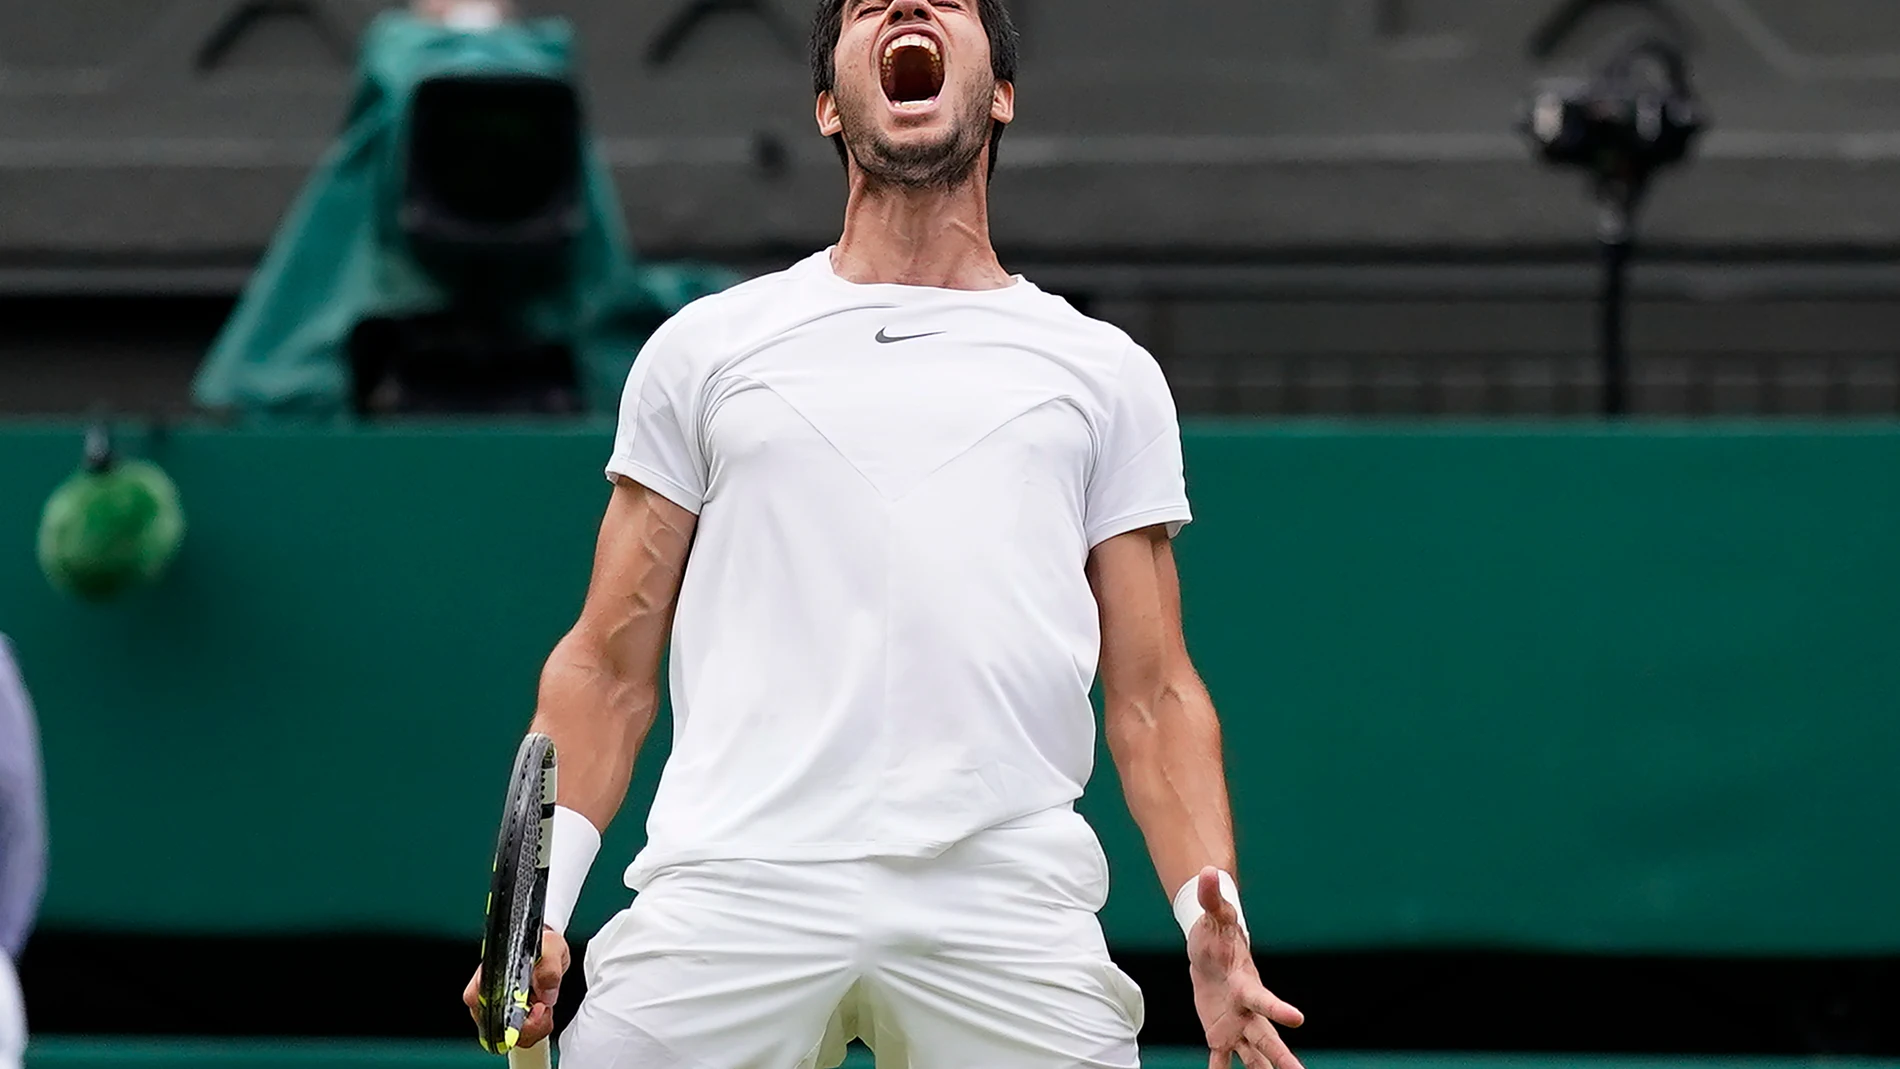 Spain's Carlos Alcaraz celebrates as he wins a point against Italy's Matteo Berrettini in a men's singles match on day eight of the Wimbledon tennis championships in London, Monday, July 10, 2023. (AP Photo/Alberto Pezzali)